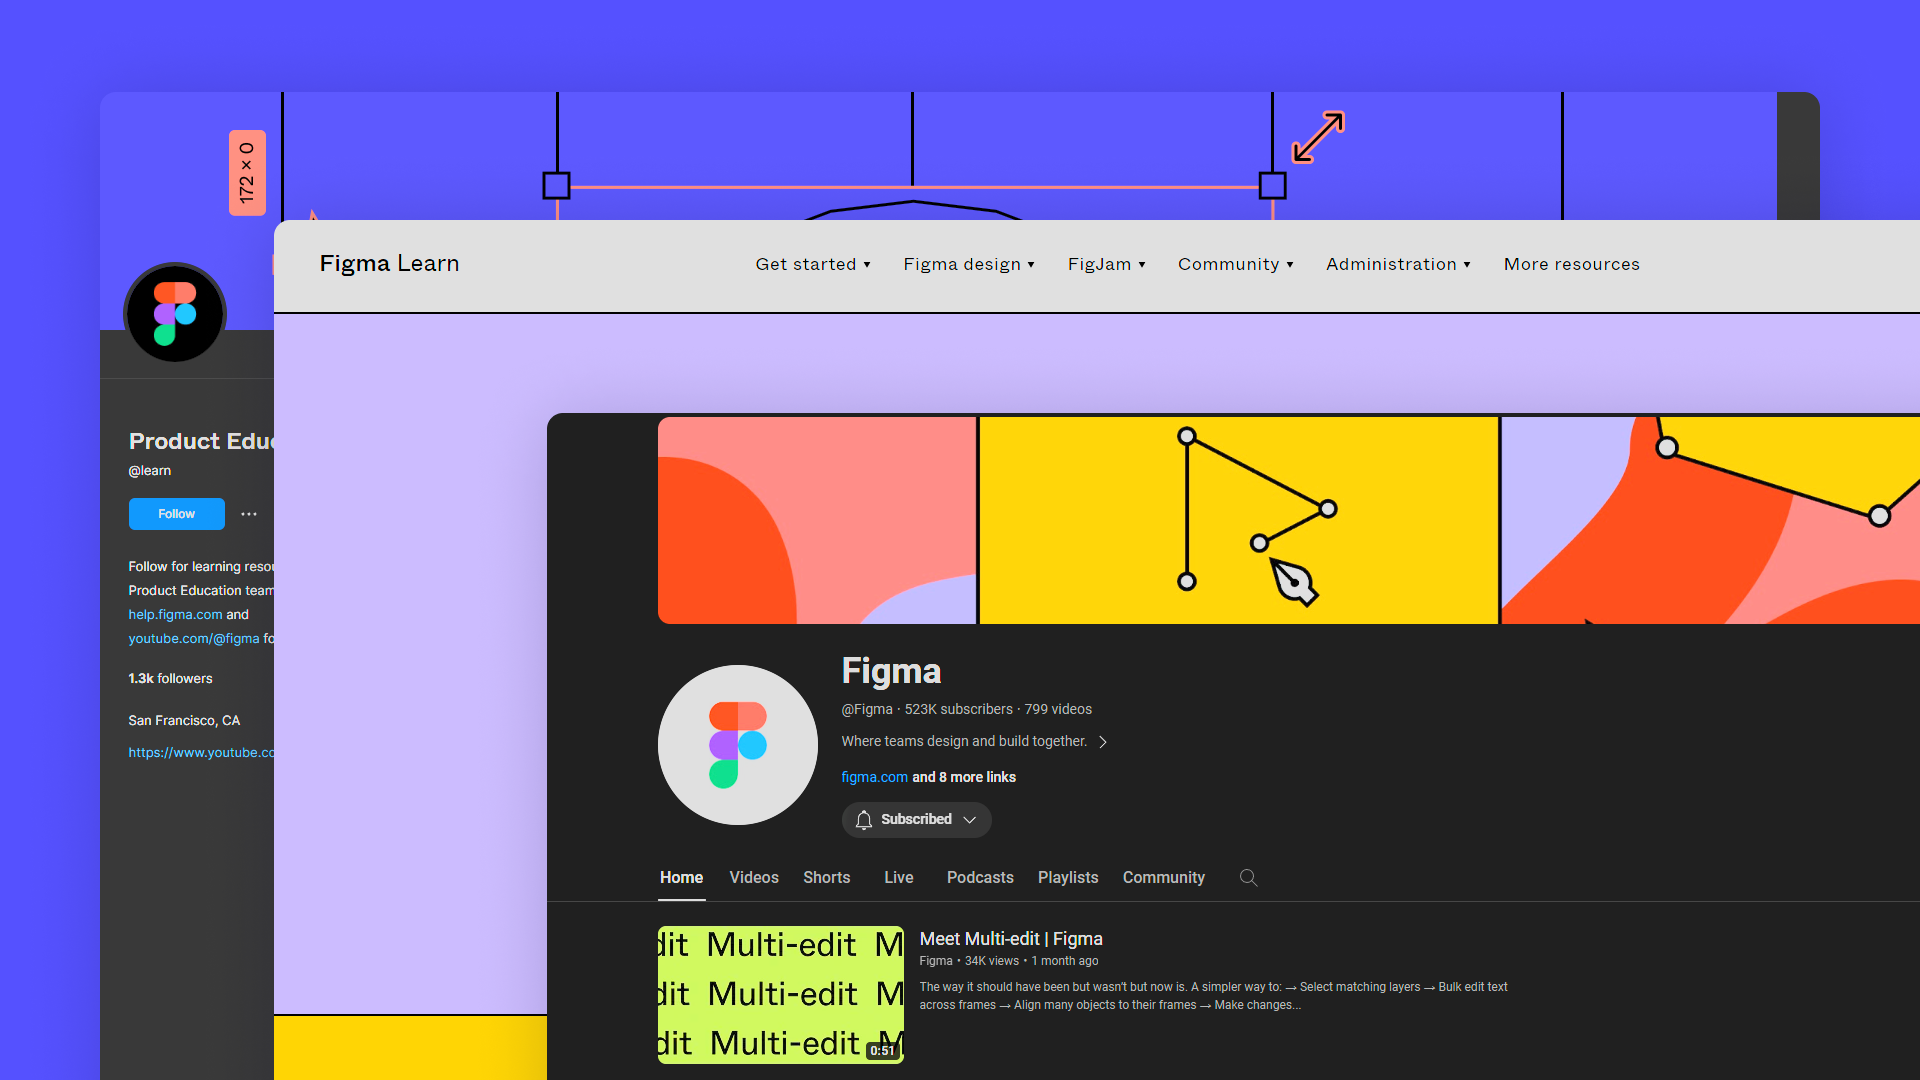 Shown is the the Figma Product Education's community profile